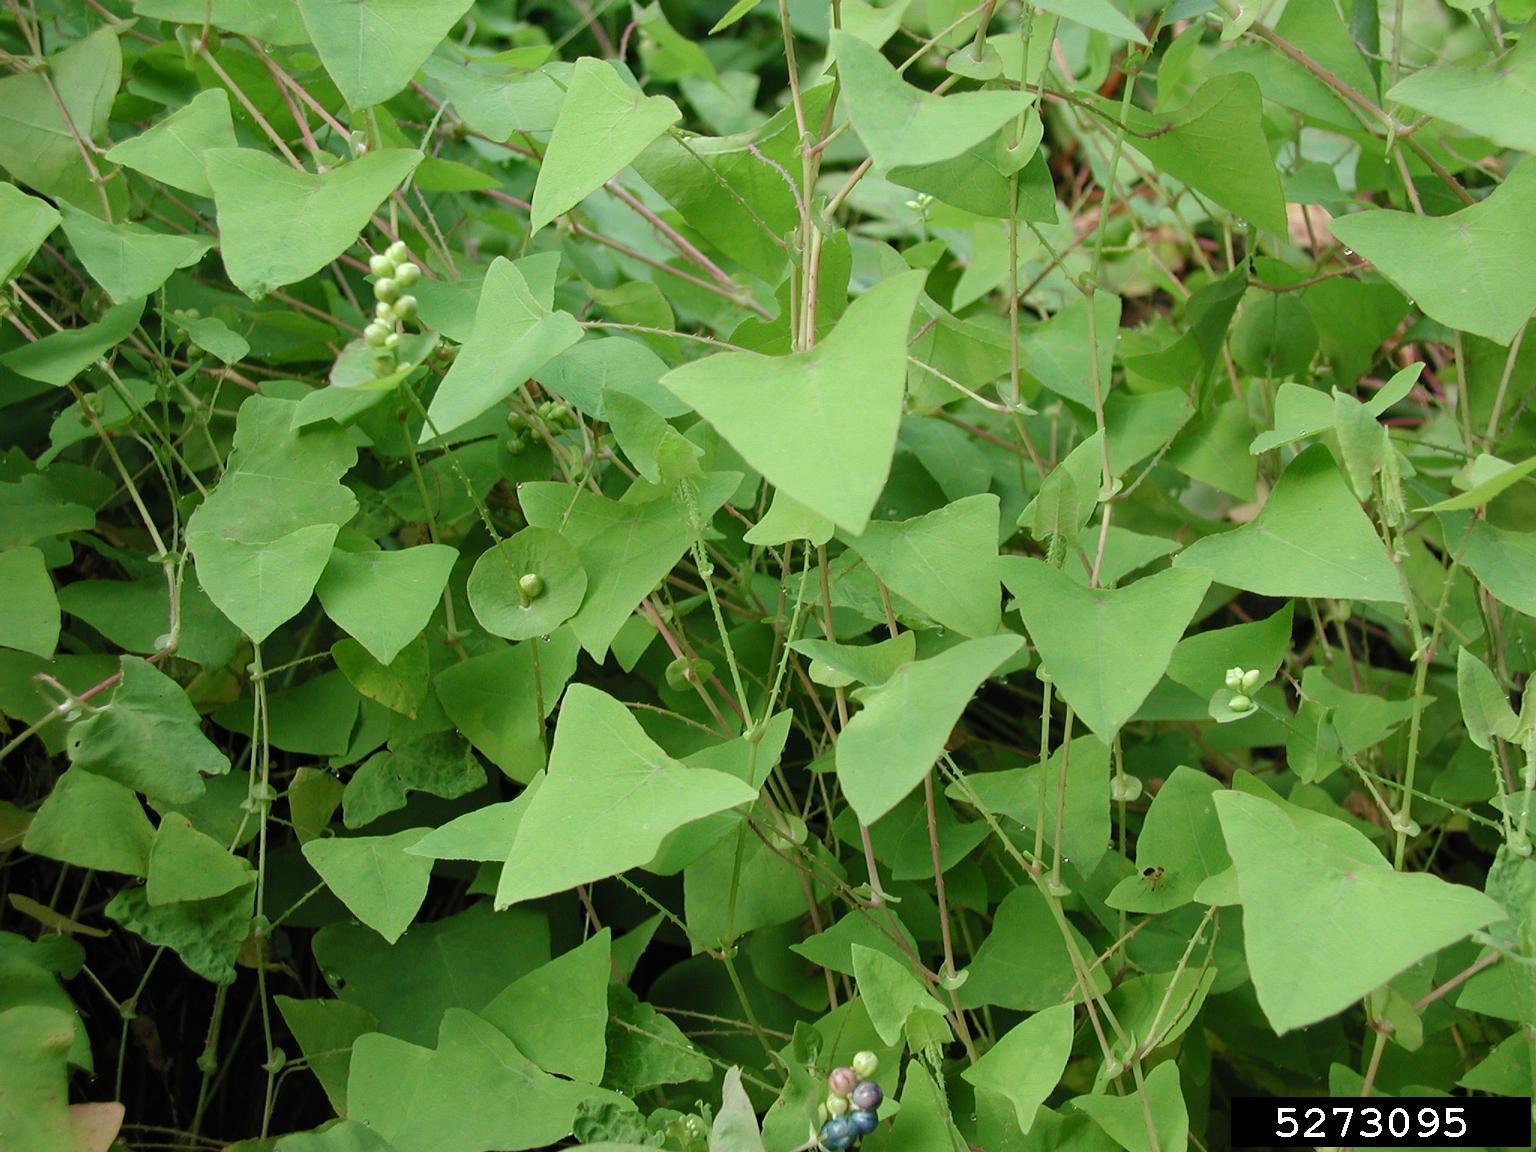 Image of Mile-a-minute weed invasive weed